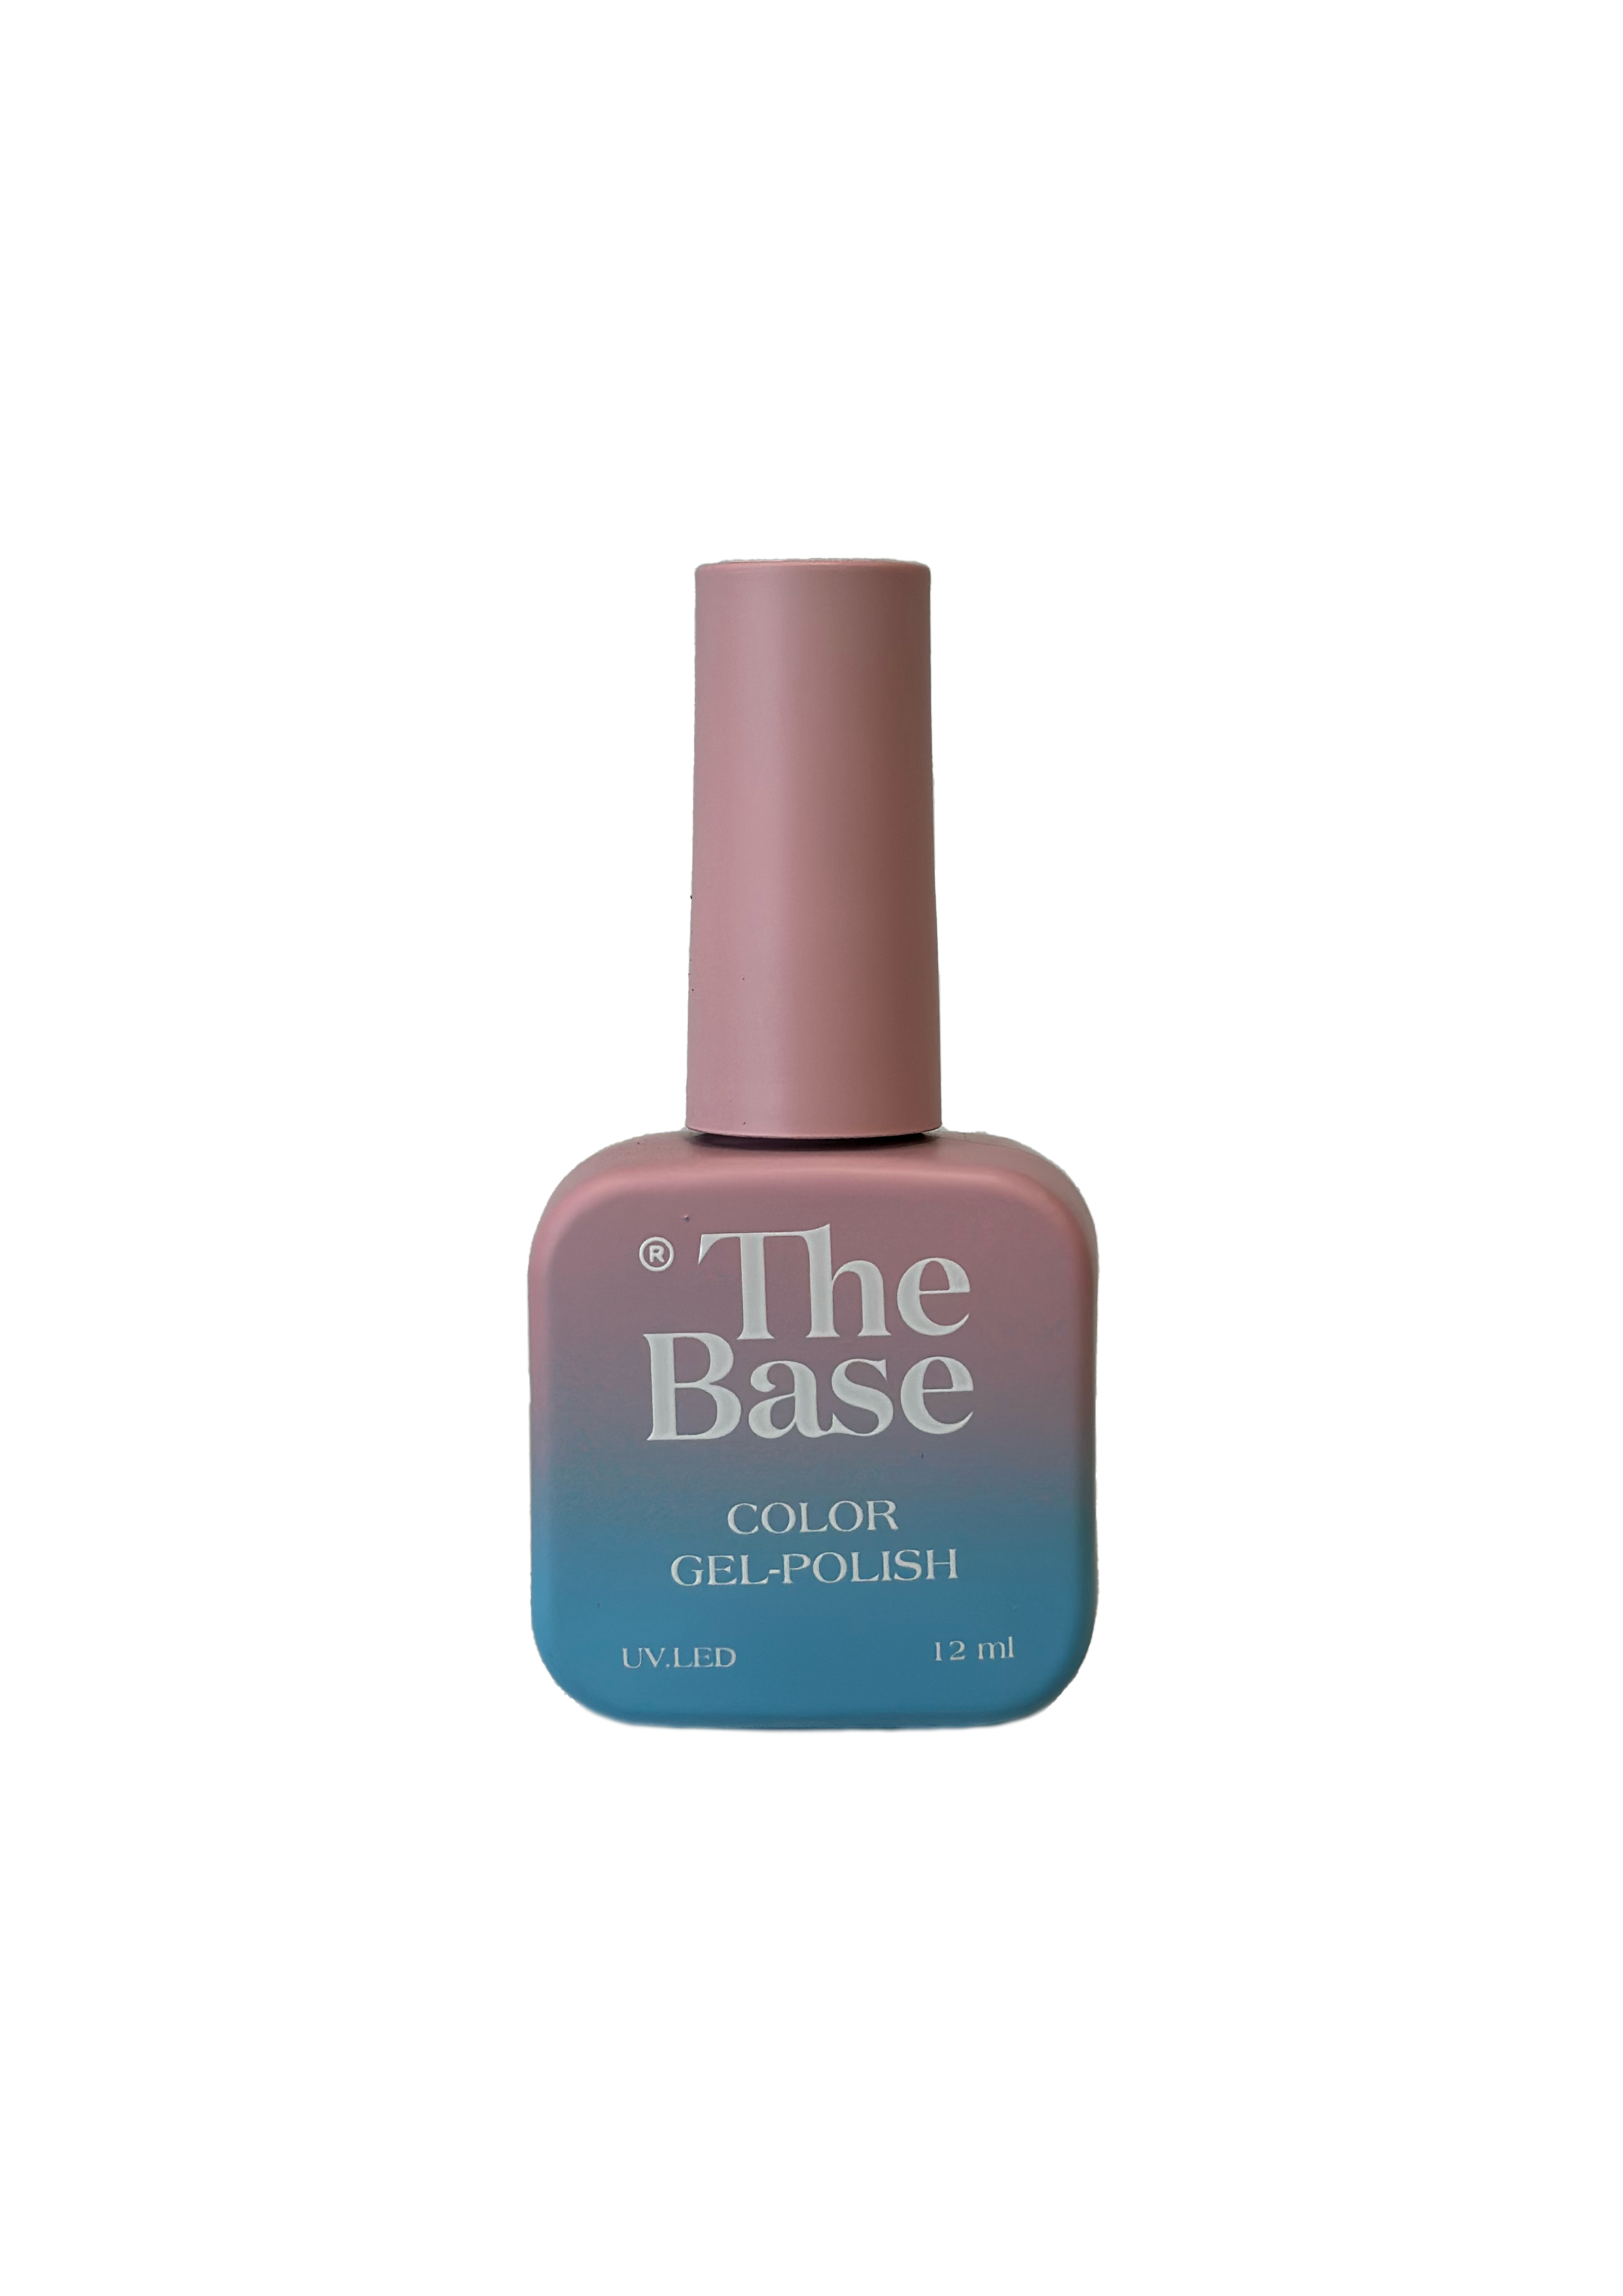 Vernis semi permanent The Base camouflage 1